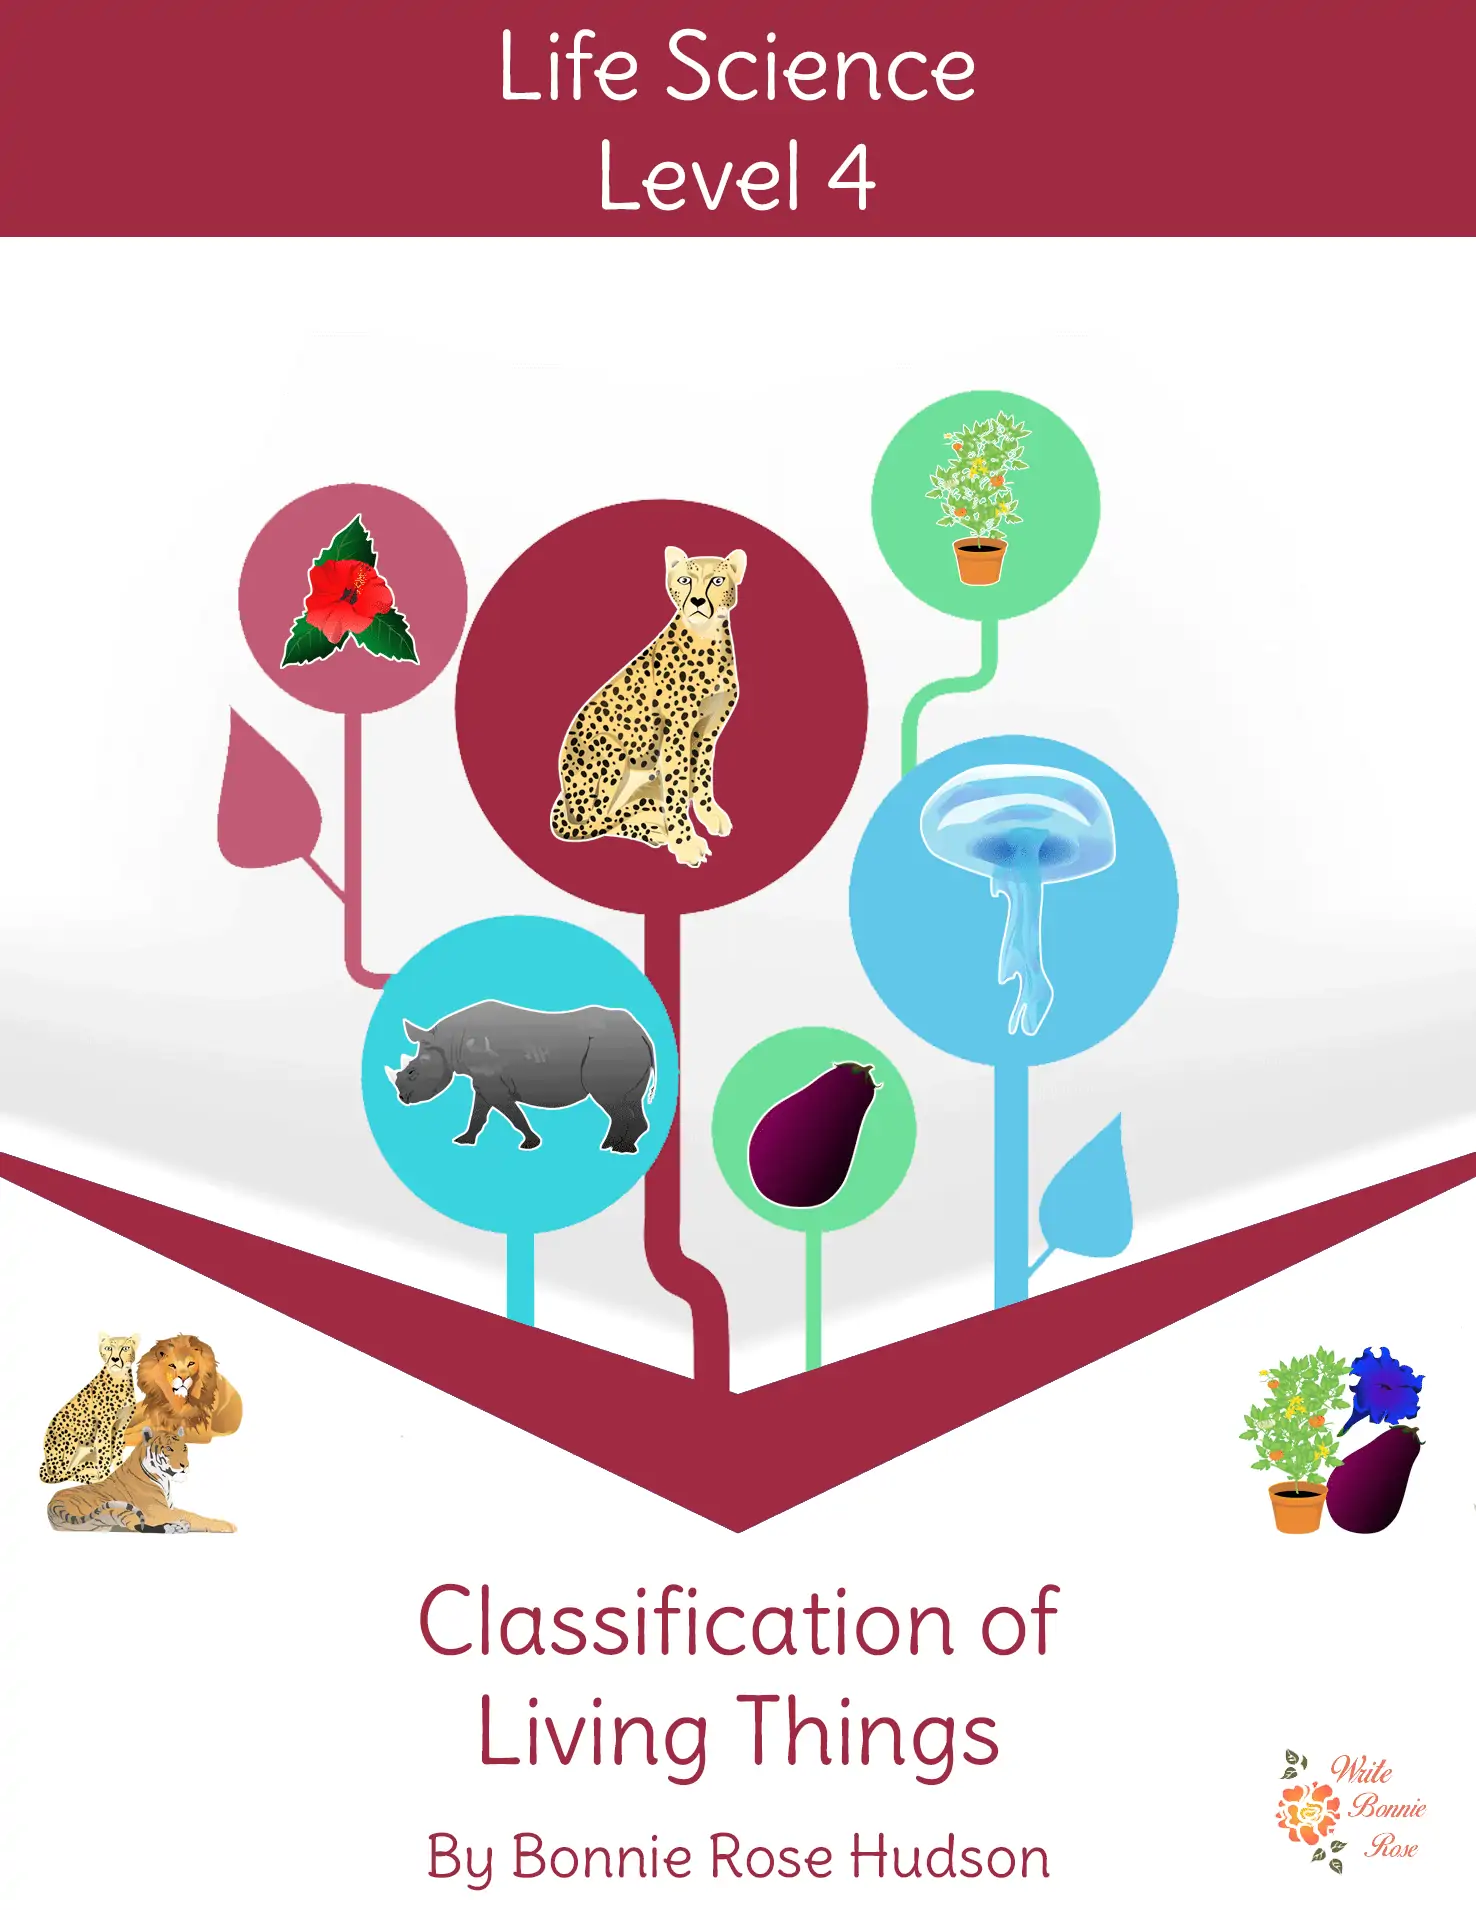 Life Science Level 4 Classification of Living Things